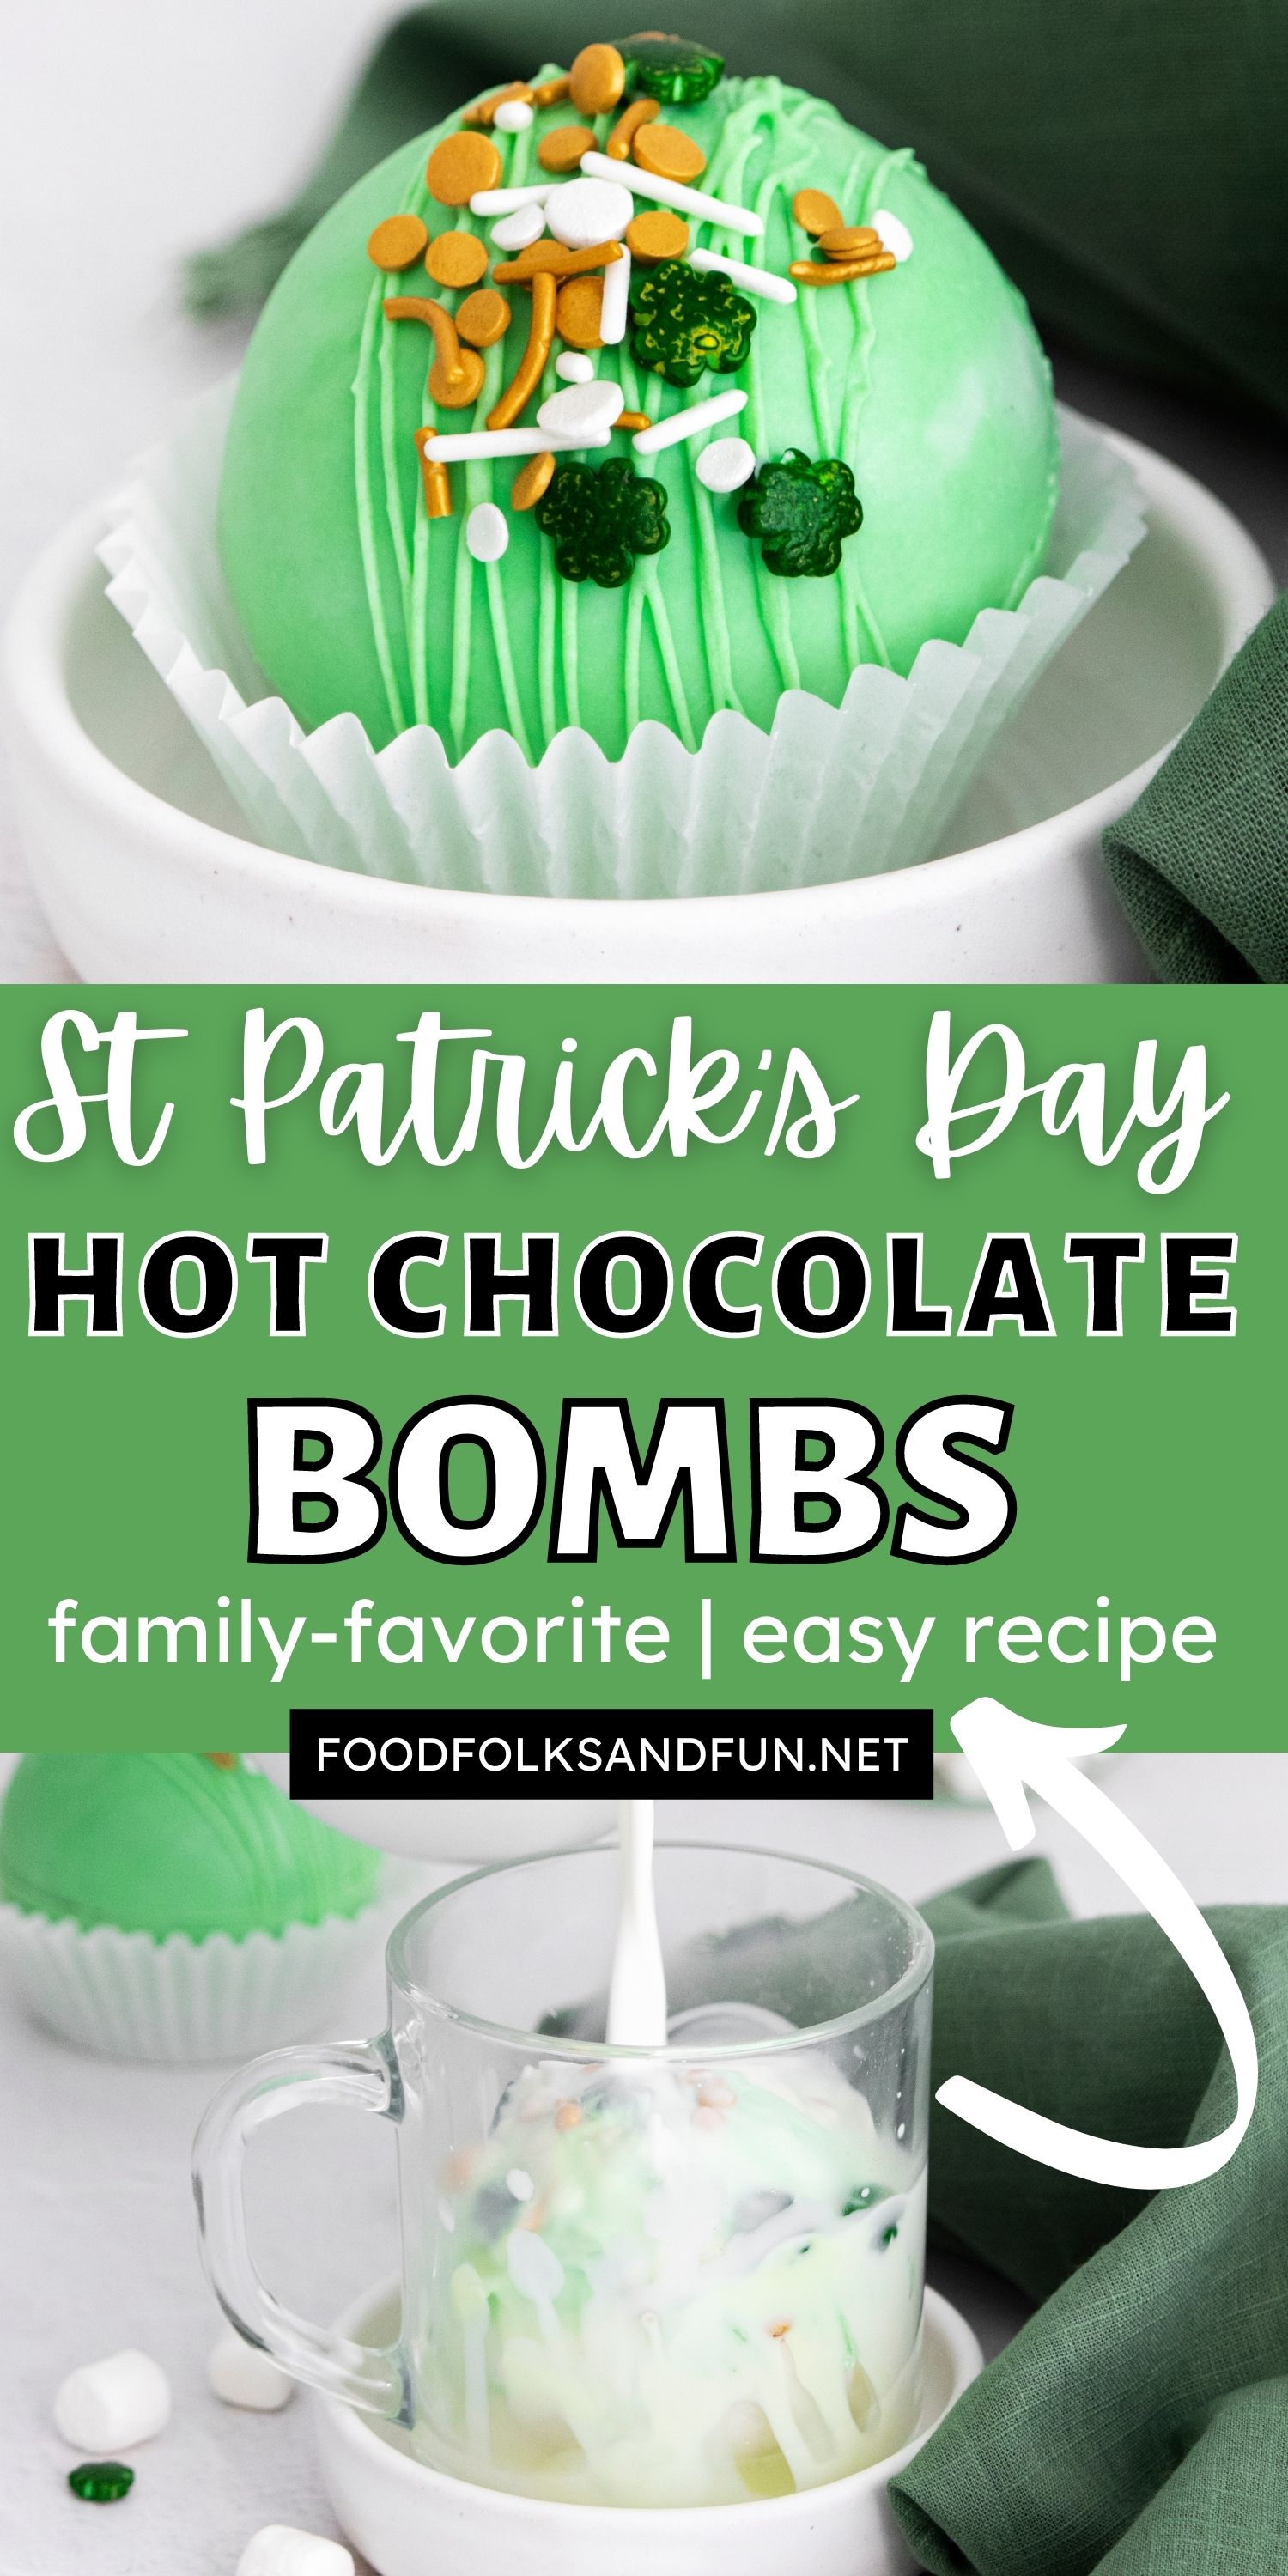 These St Patrick’s Hot Chocolate Bombs are the perfect combination of milk chocolate and white chocolate. They’re so fun to gift! via @foodfolksandfun